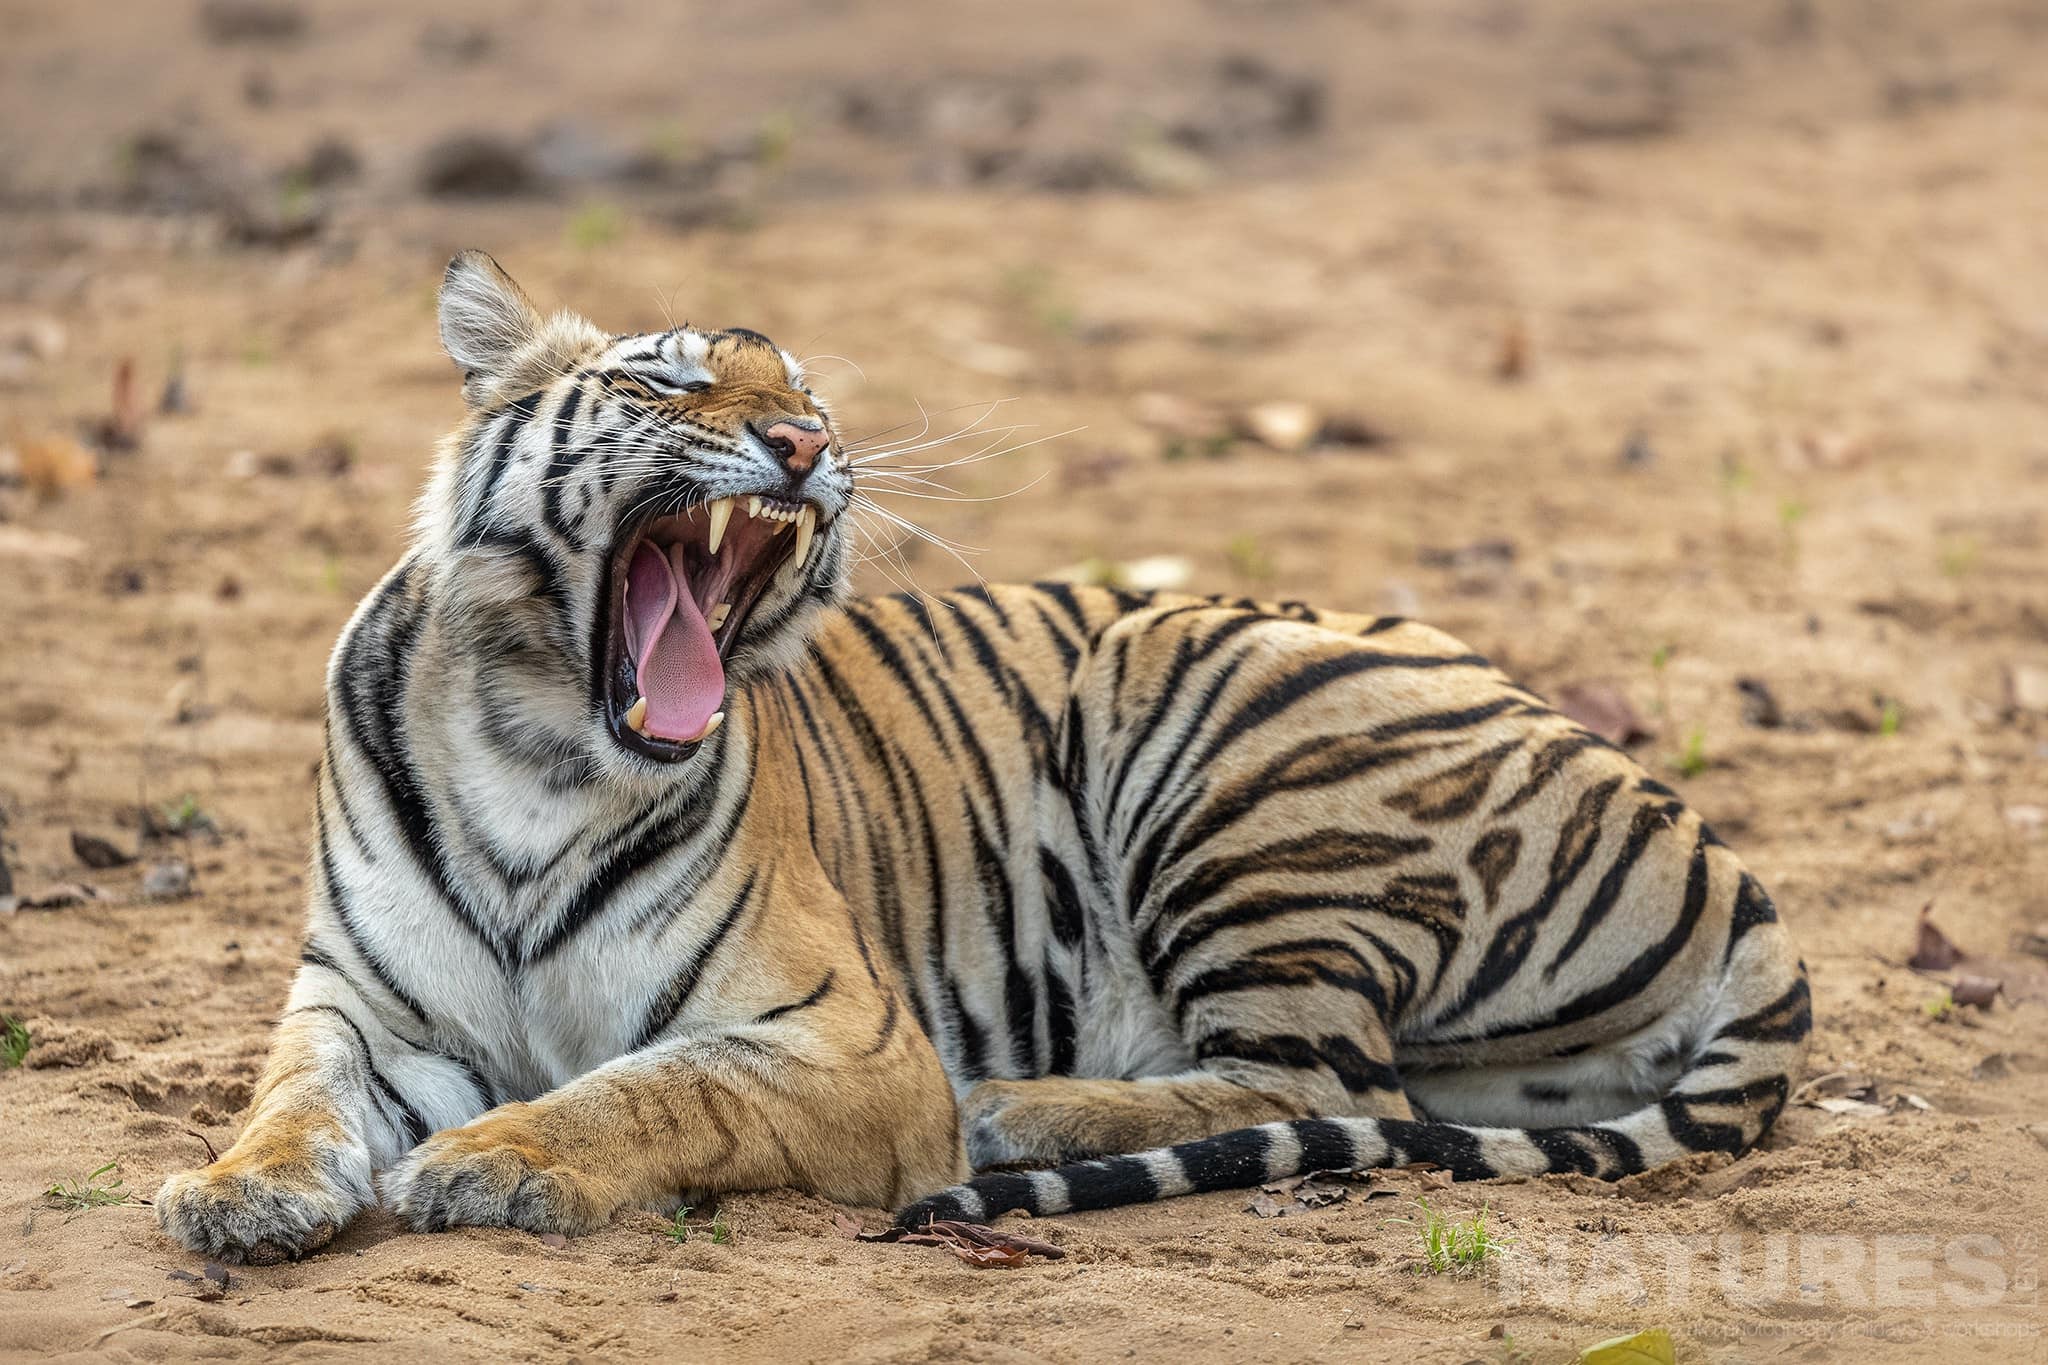 One Of Bandhavgarhs Tigers Yawns And Shows Off Some Impressive Canines Photographed During The Natureslens India'S Bengal Tigers Of Bandhavgarh Photography Holiday